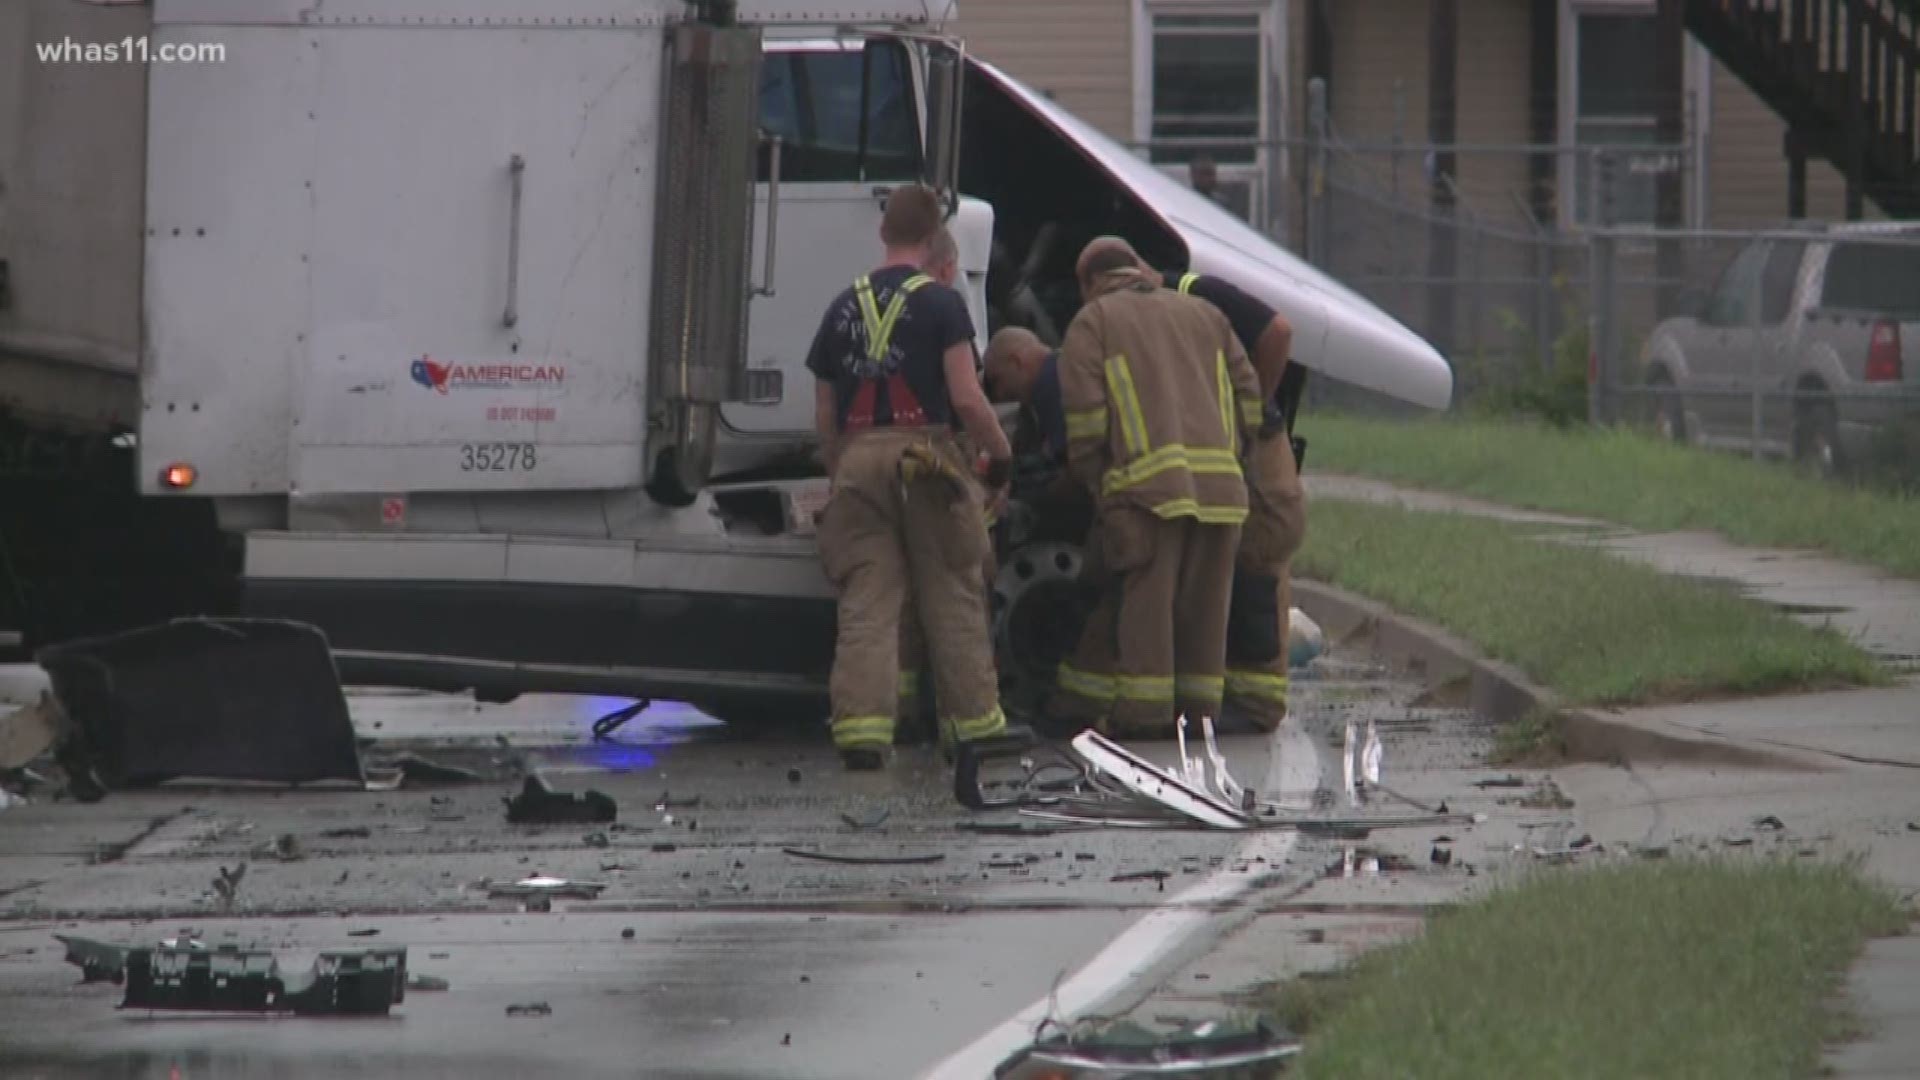 Four people, including a young girl, have been transported to the hospital after an accident in Shively Tuesday.